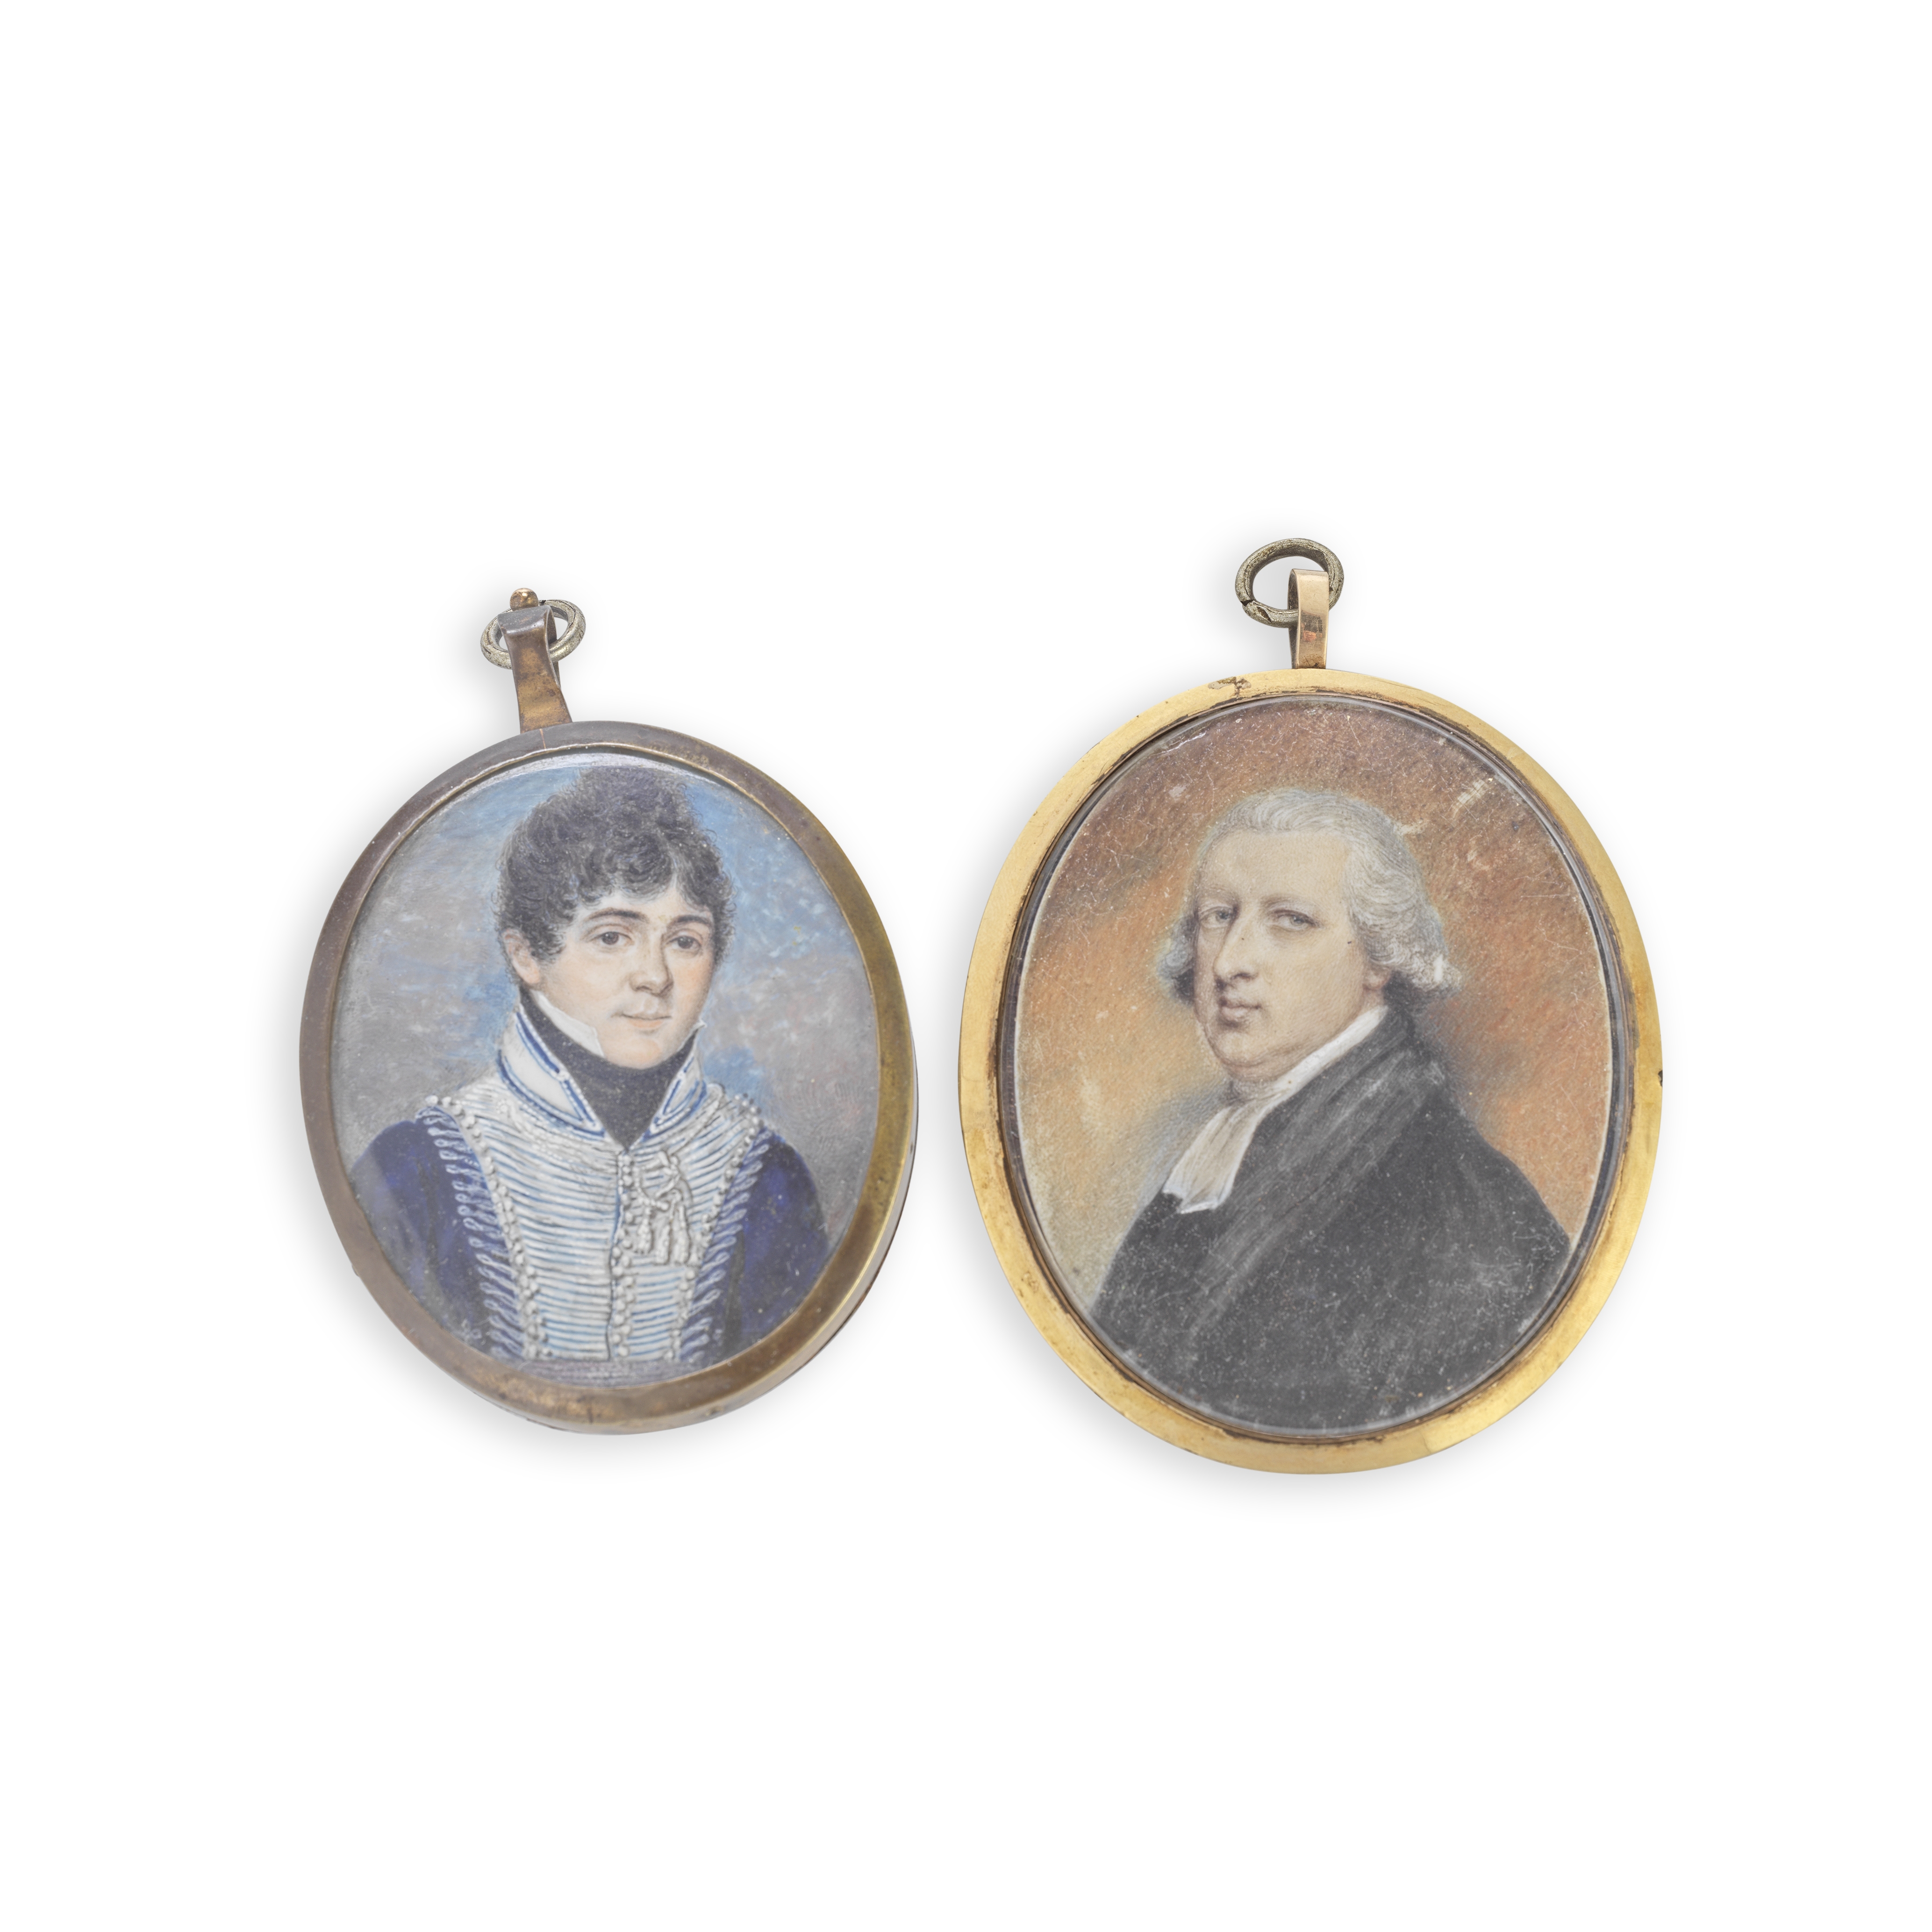 Manner of Henry Jacob Burch (British, b.1763): Two early 19th century painted ivory oval portrai...